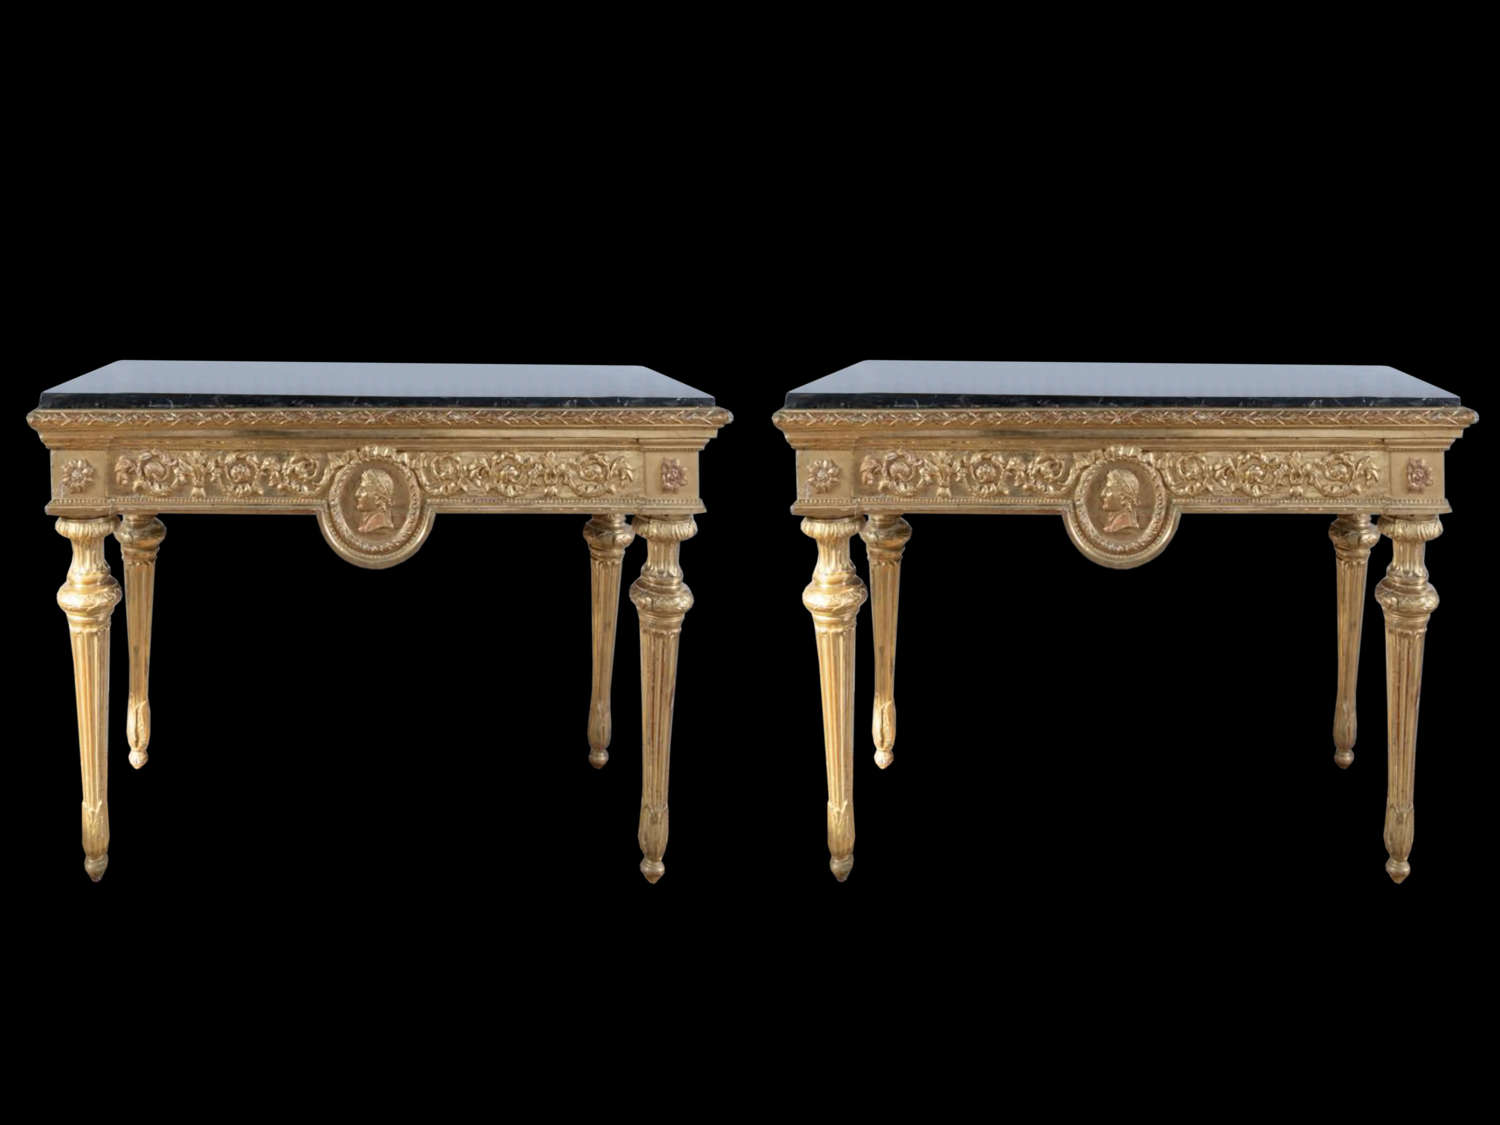 A  PAIR OF CARVED GILTWOOD CONSOLE TABLES,LUIGI XVI PERIOD C1785